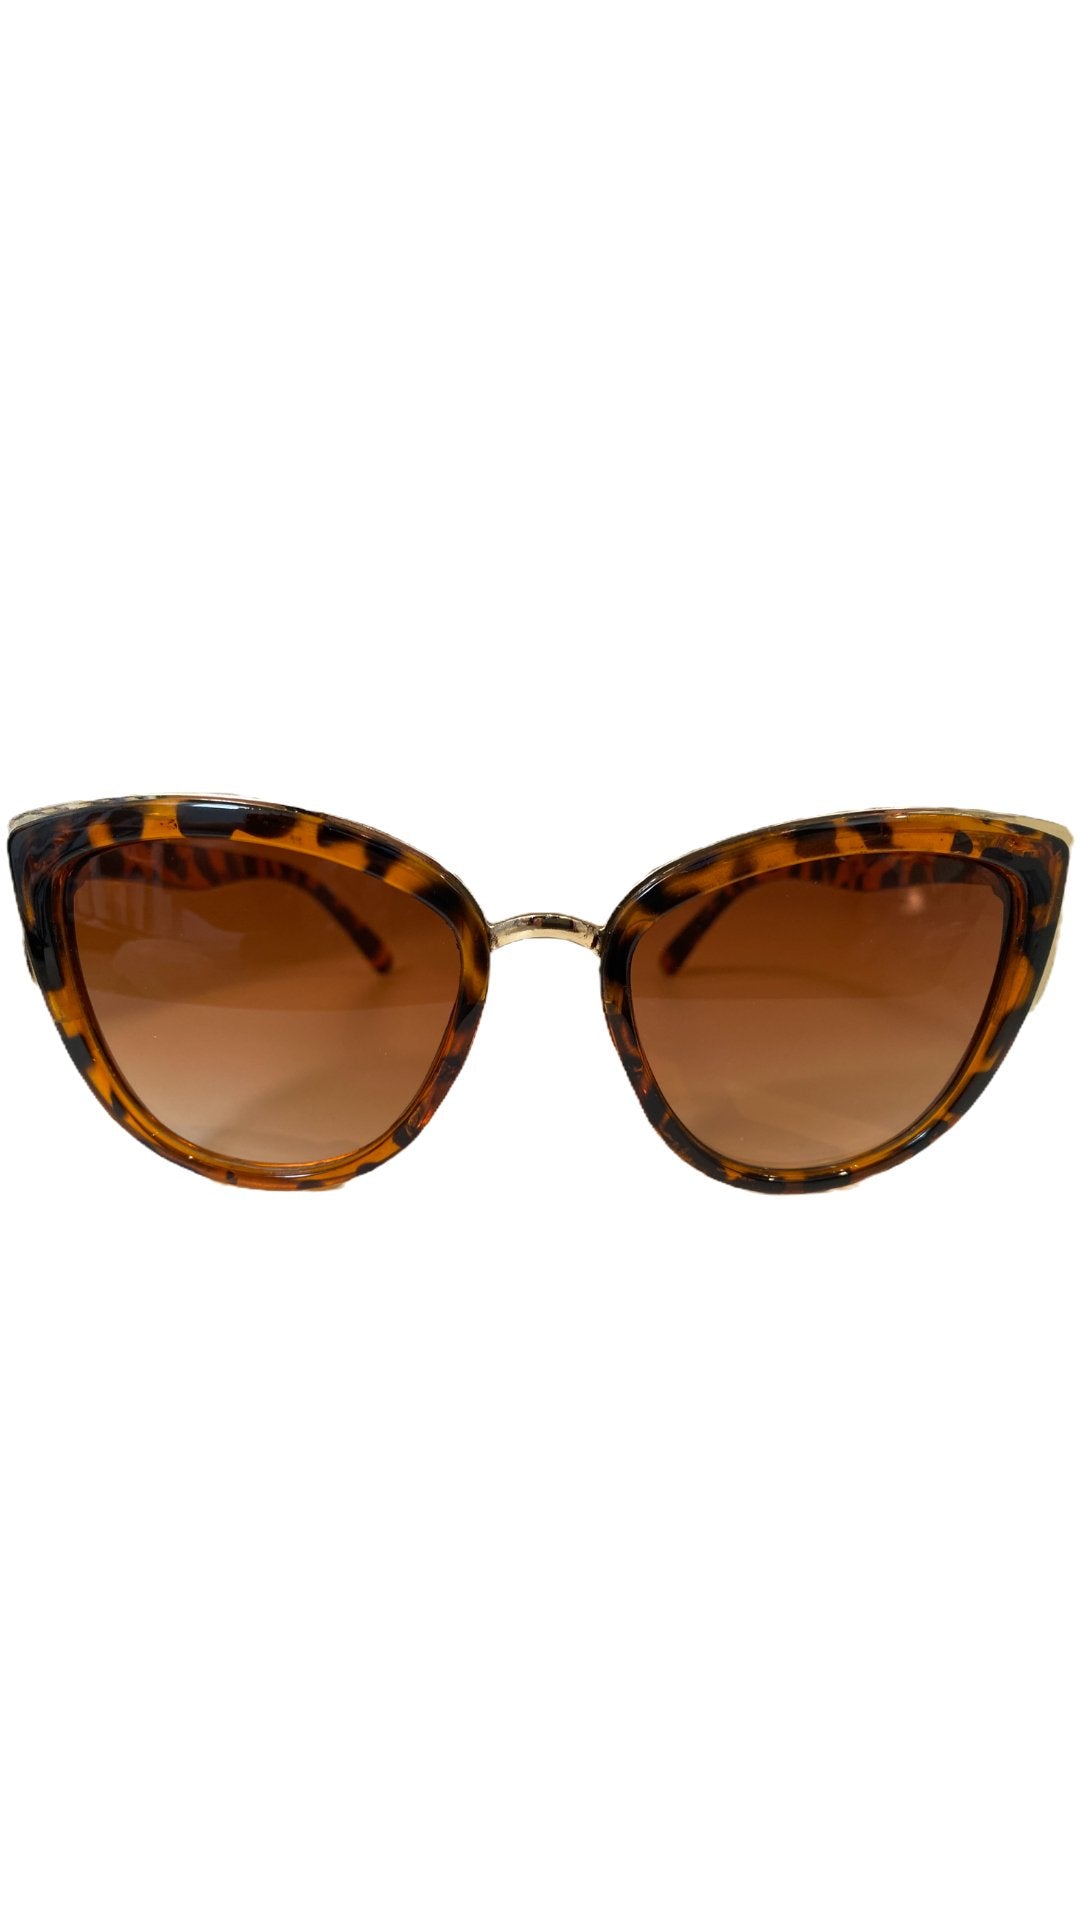 Cheetah Cat Eyes Sunglasses - Polarized Acetate Frame Glasses - Eques Timepieces